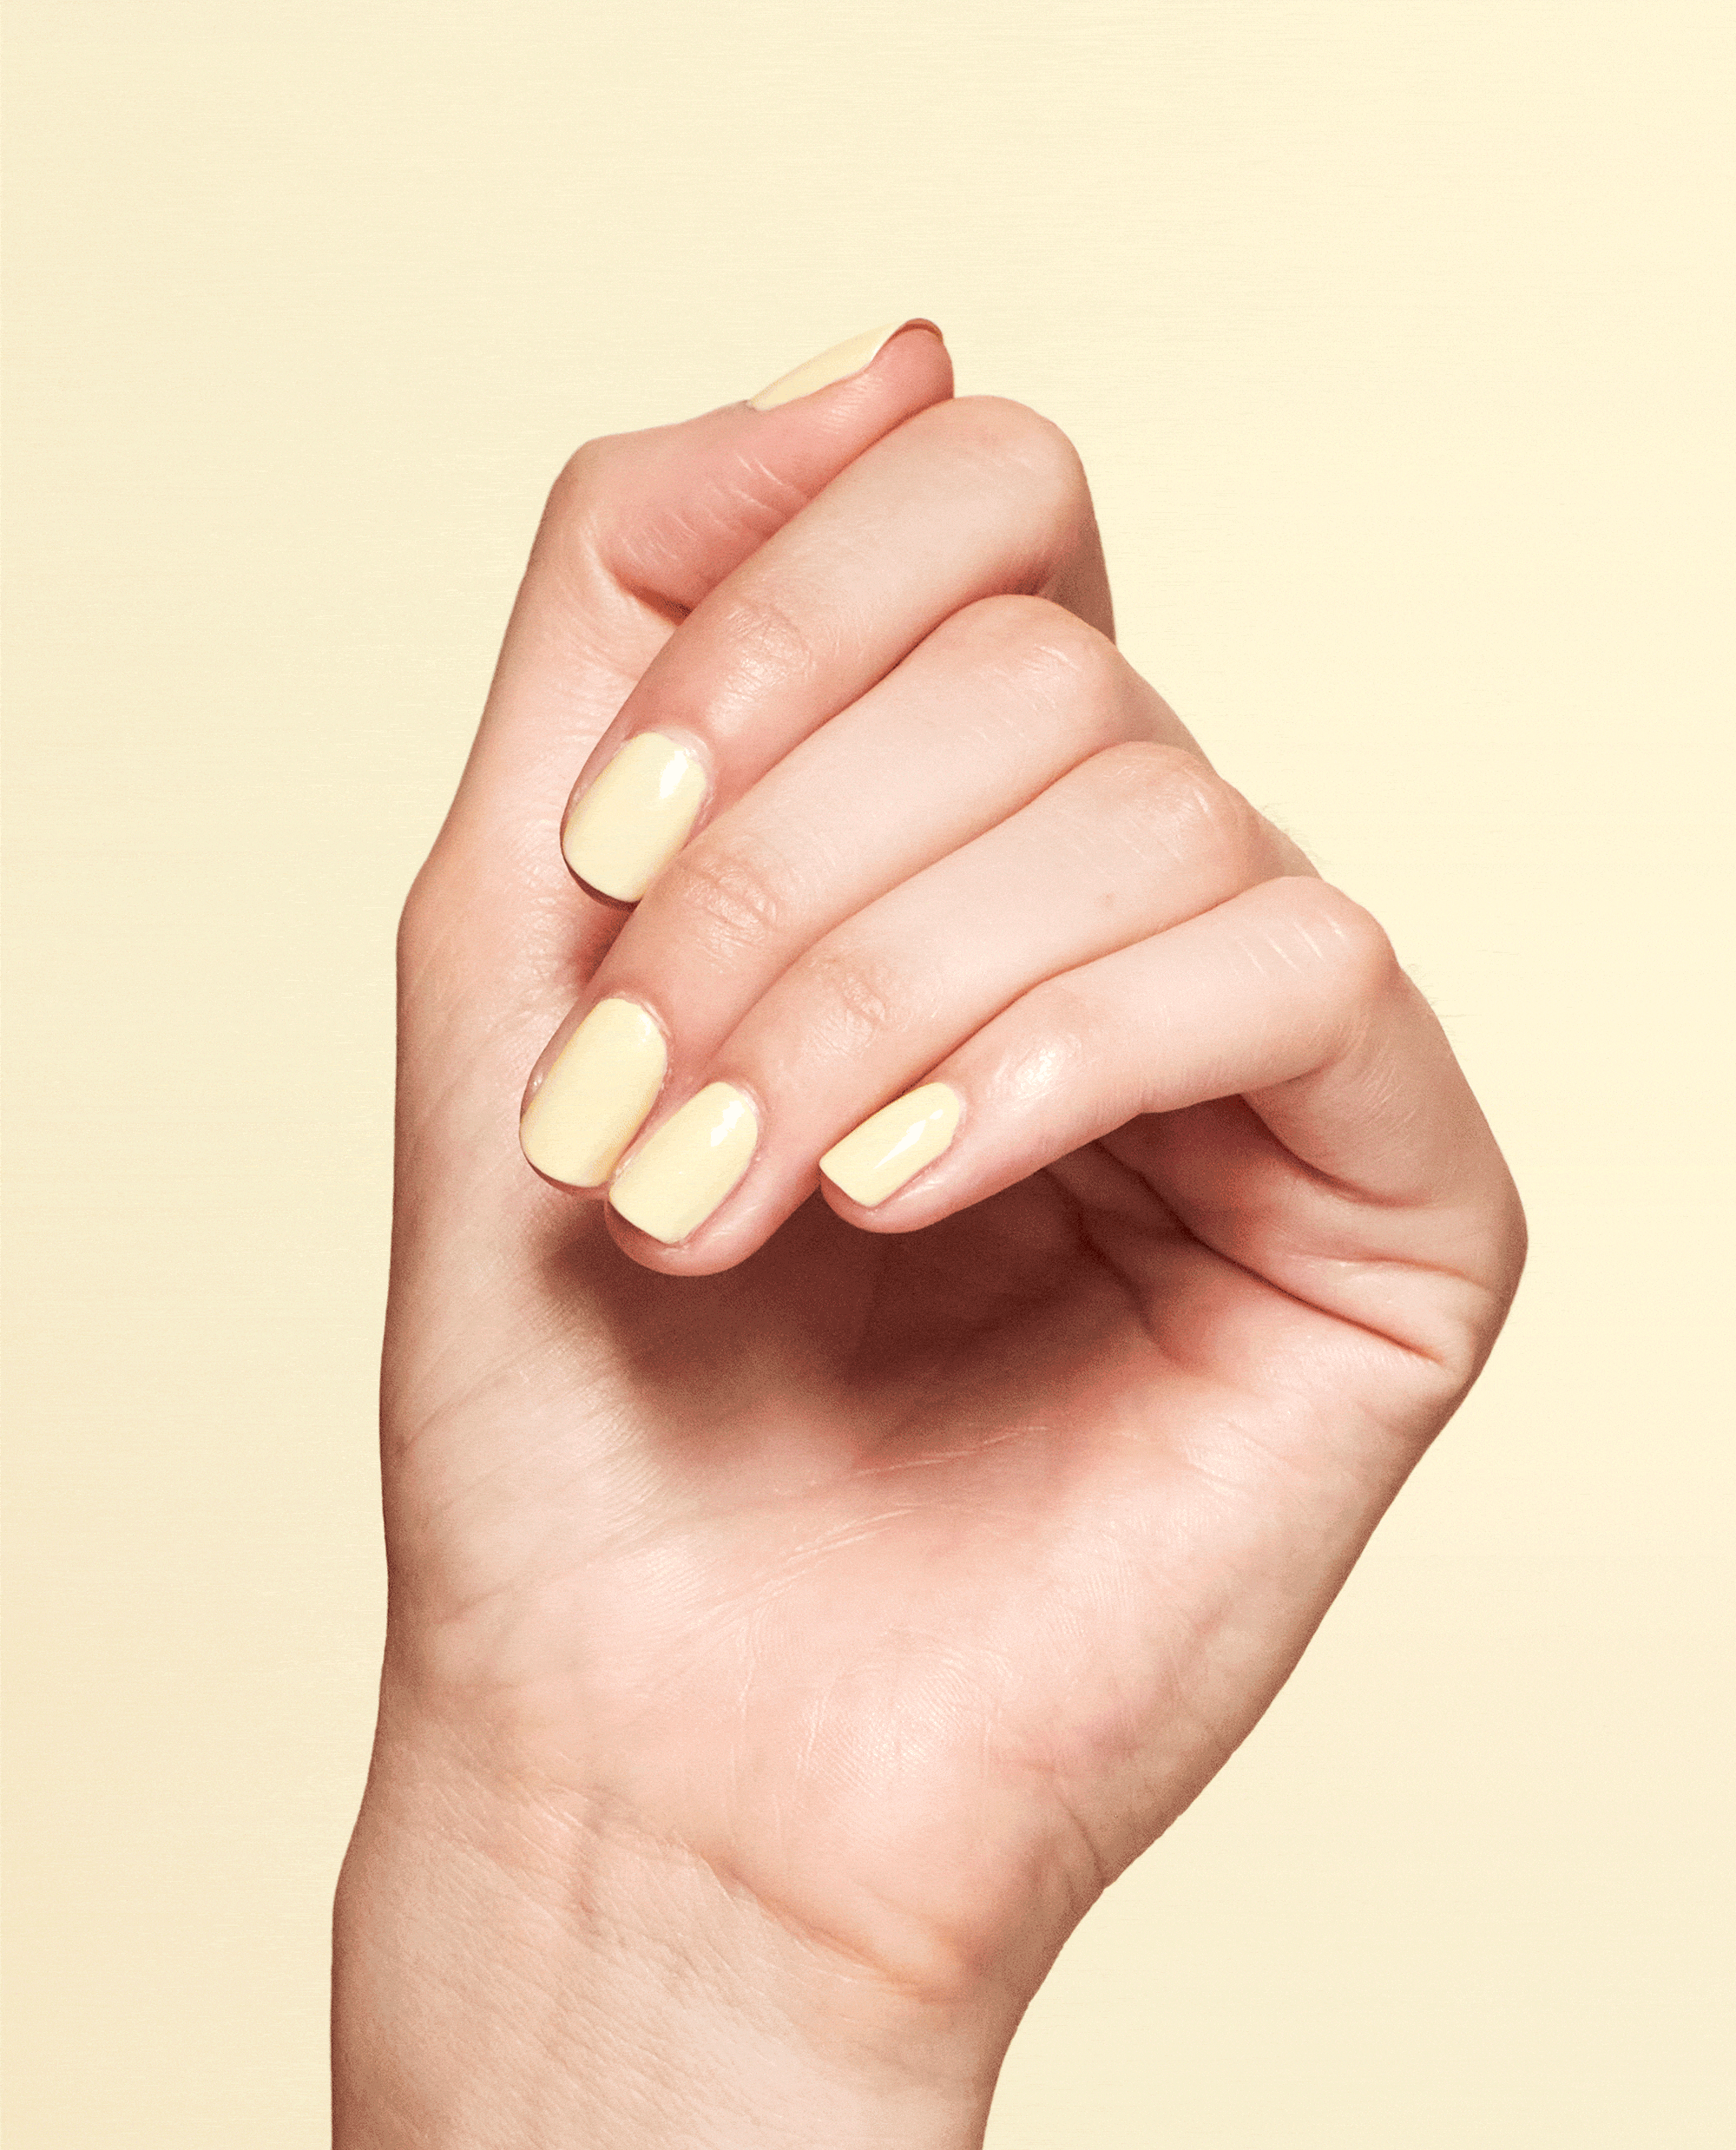 Yellow Nail Polish Is A Cheerful Mood-Booster, Science Says